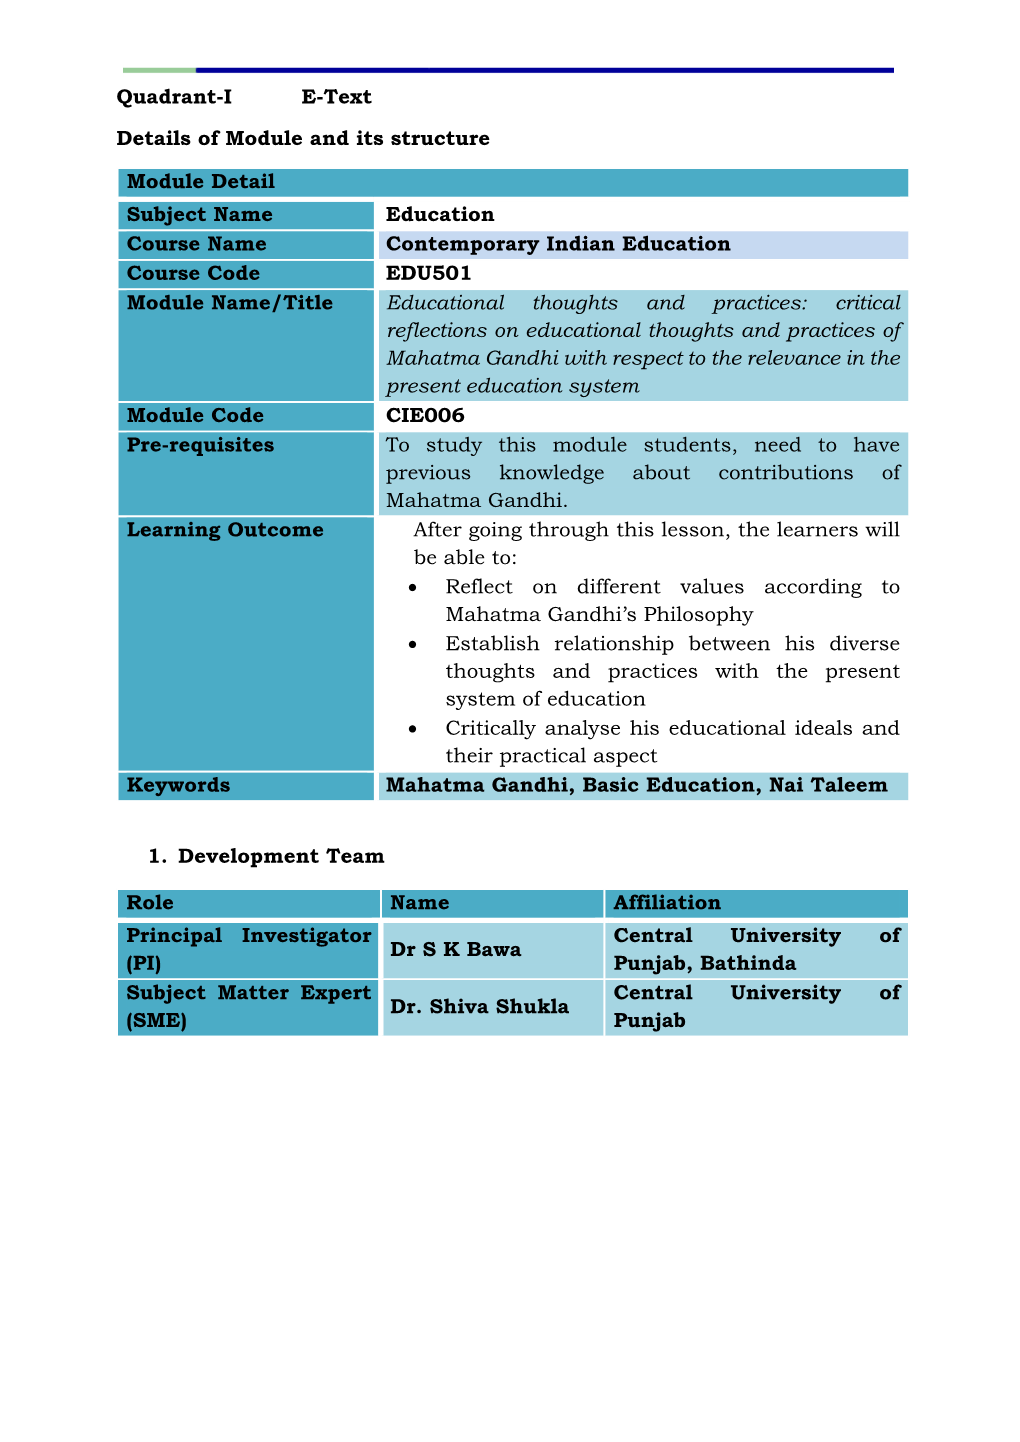 Quadrant-I E-Text Details of Module and Its Structure Module Detail Subject Name Education Course Name Contemporary Indian